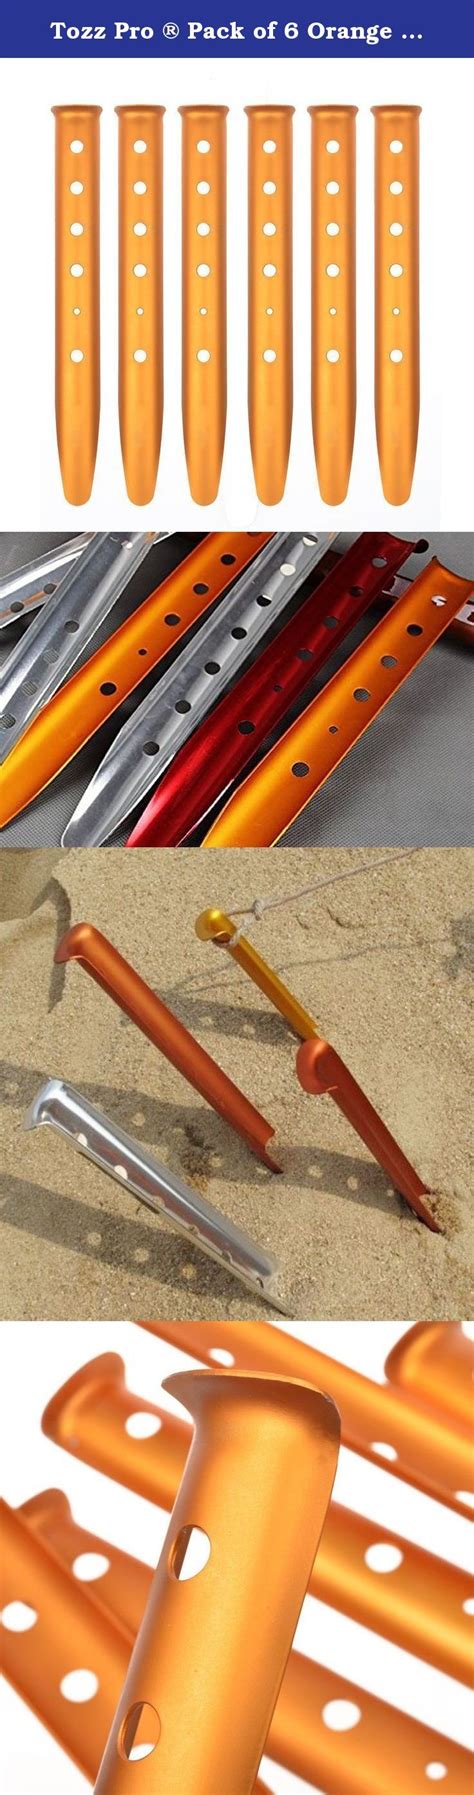 tozz pro pack   orange color aluminum tent stakes  camping trip hiking backpacking